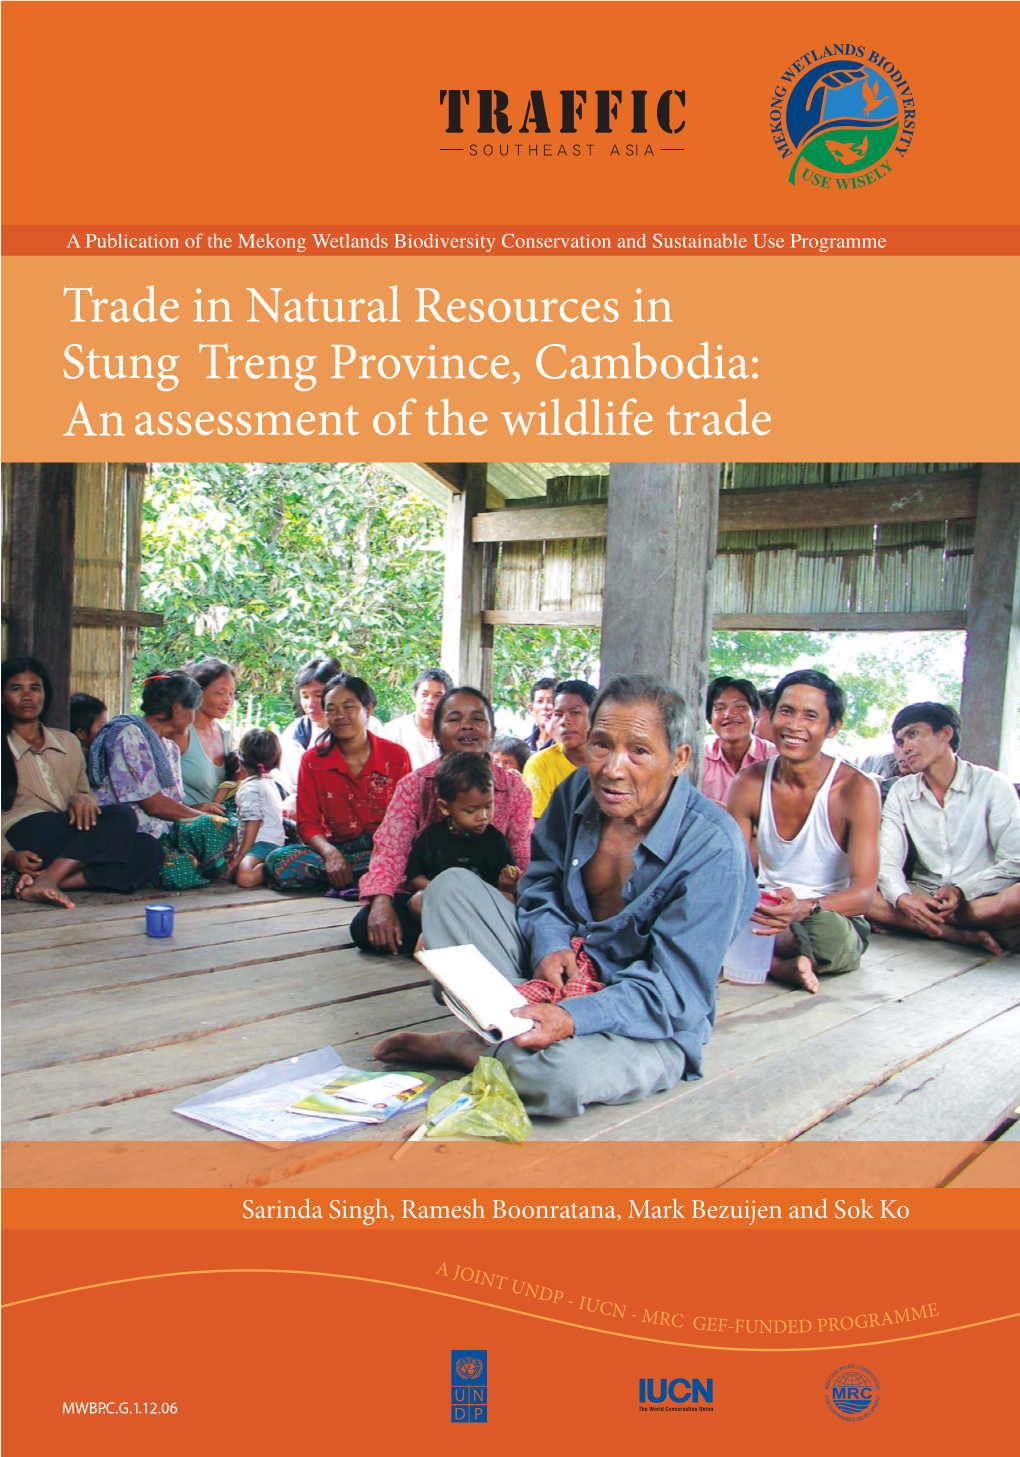 Trade in Natural Resources in Stung Treng Province, Cambodia: an Assessment of the Wildlife Trade